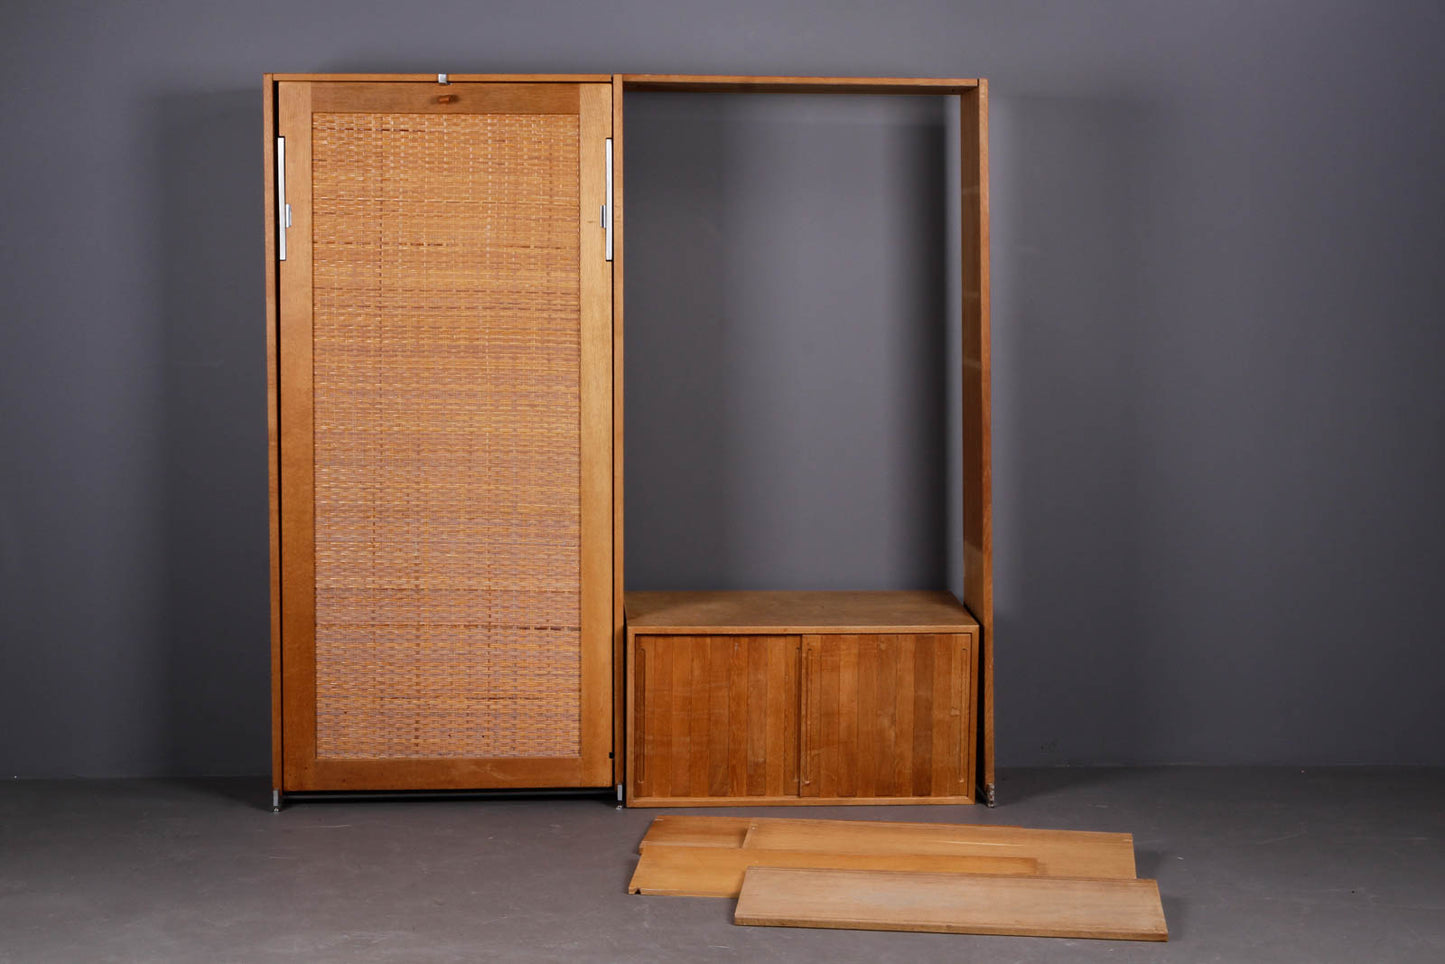 Hans J. Wegner Upright bed with bookcase and cabinet.